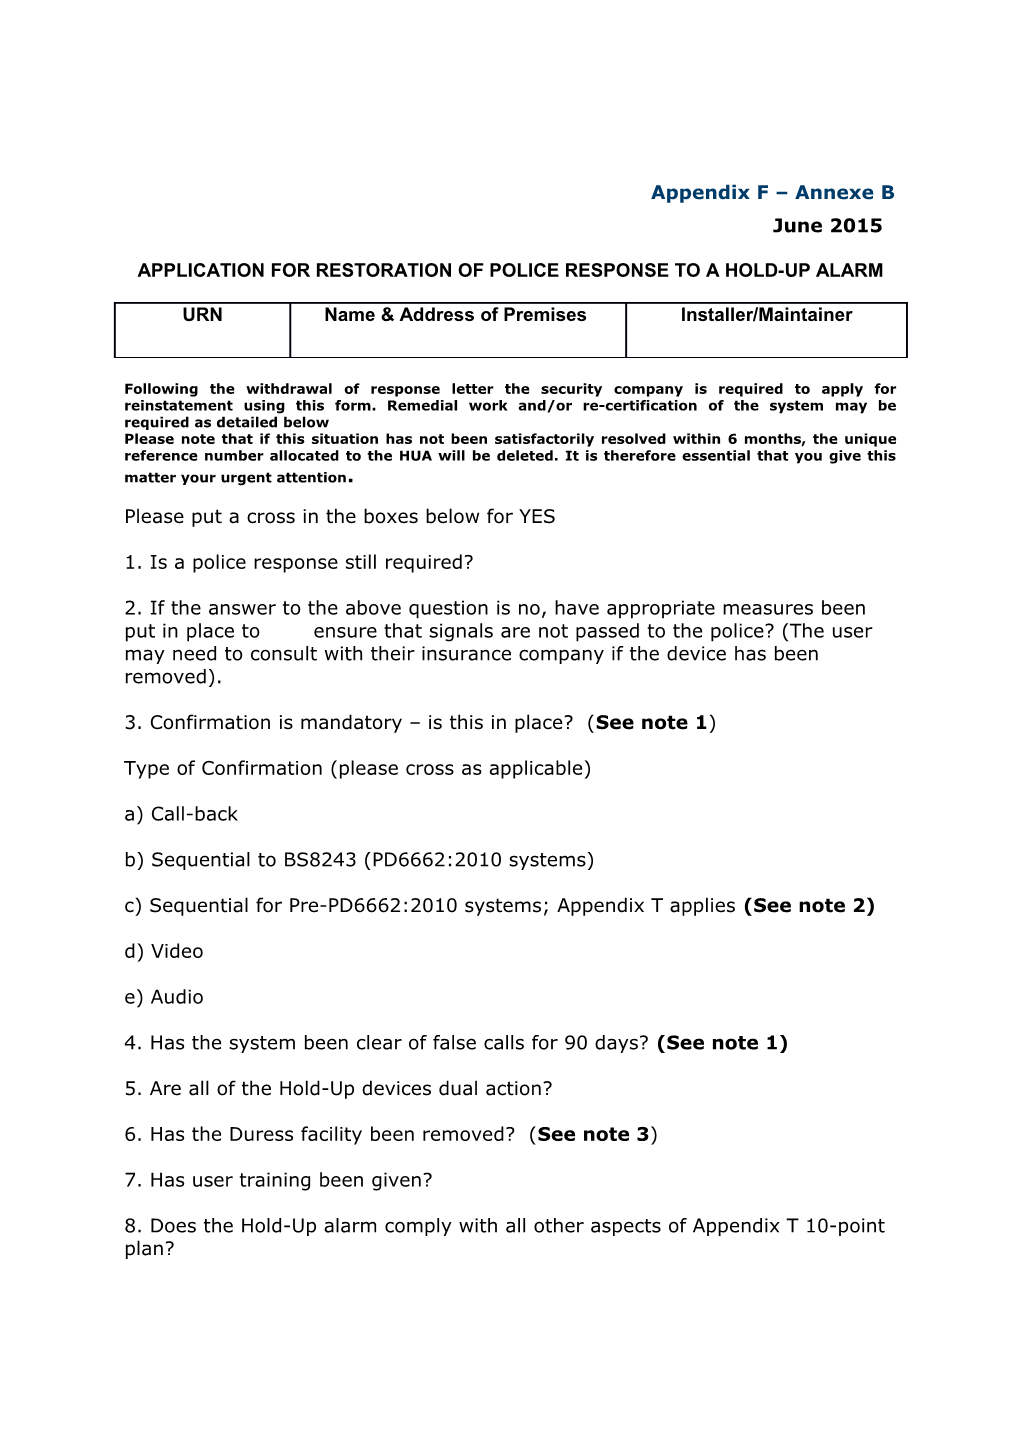 Application for Restoration of Police Response to a Hold-Up Alarm